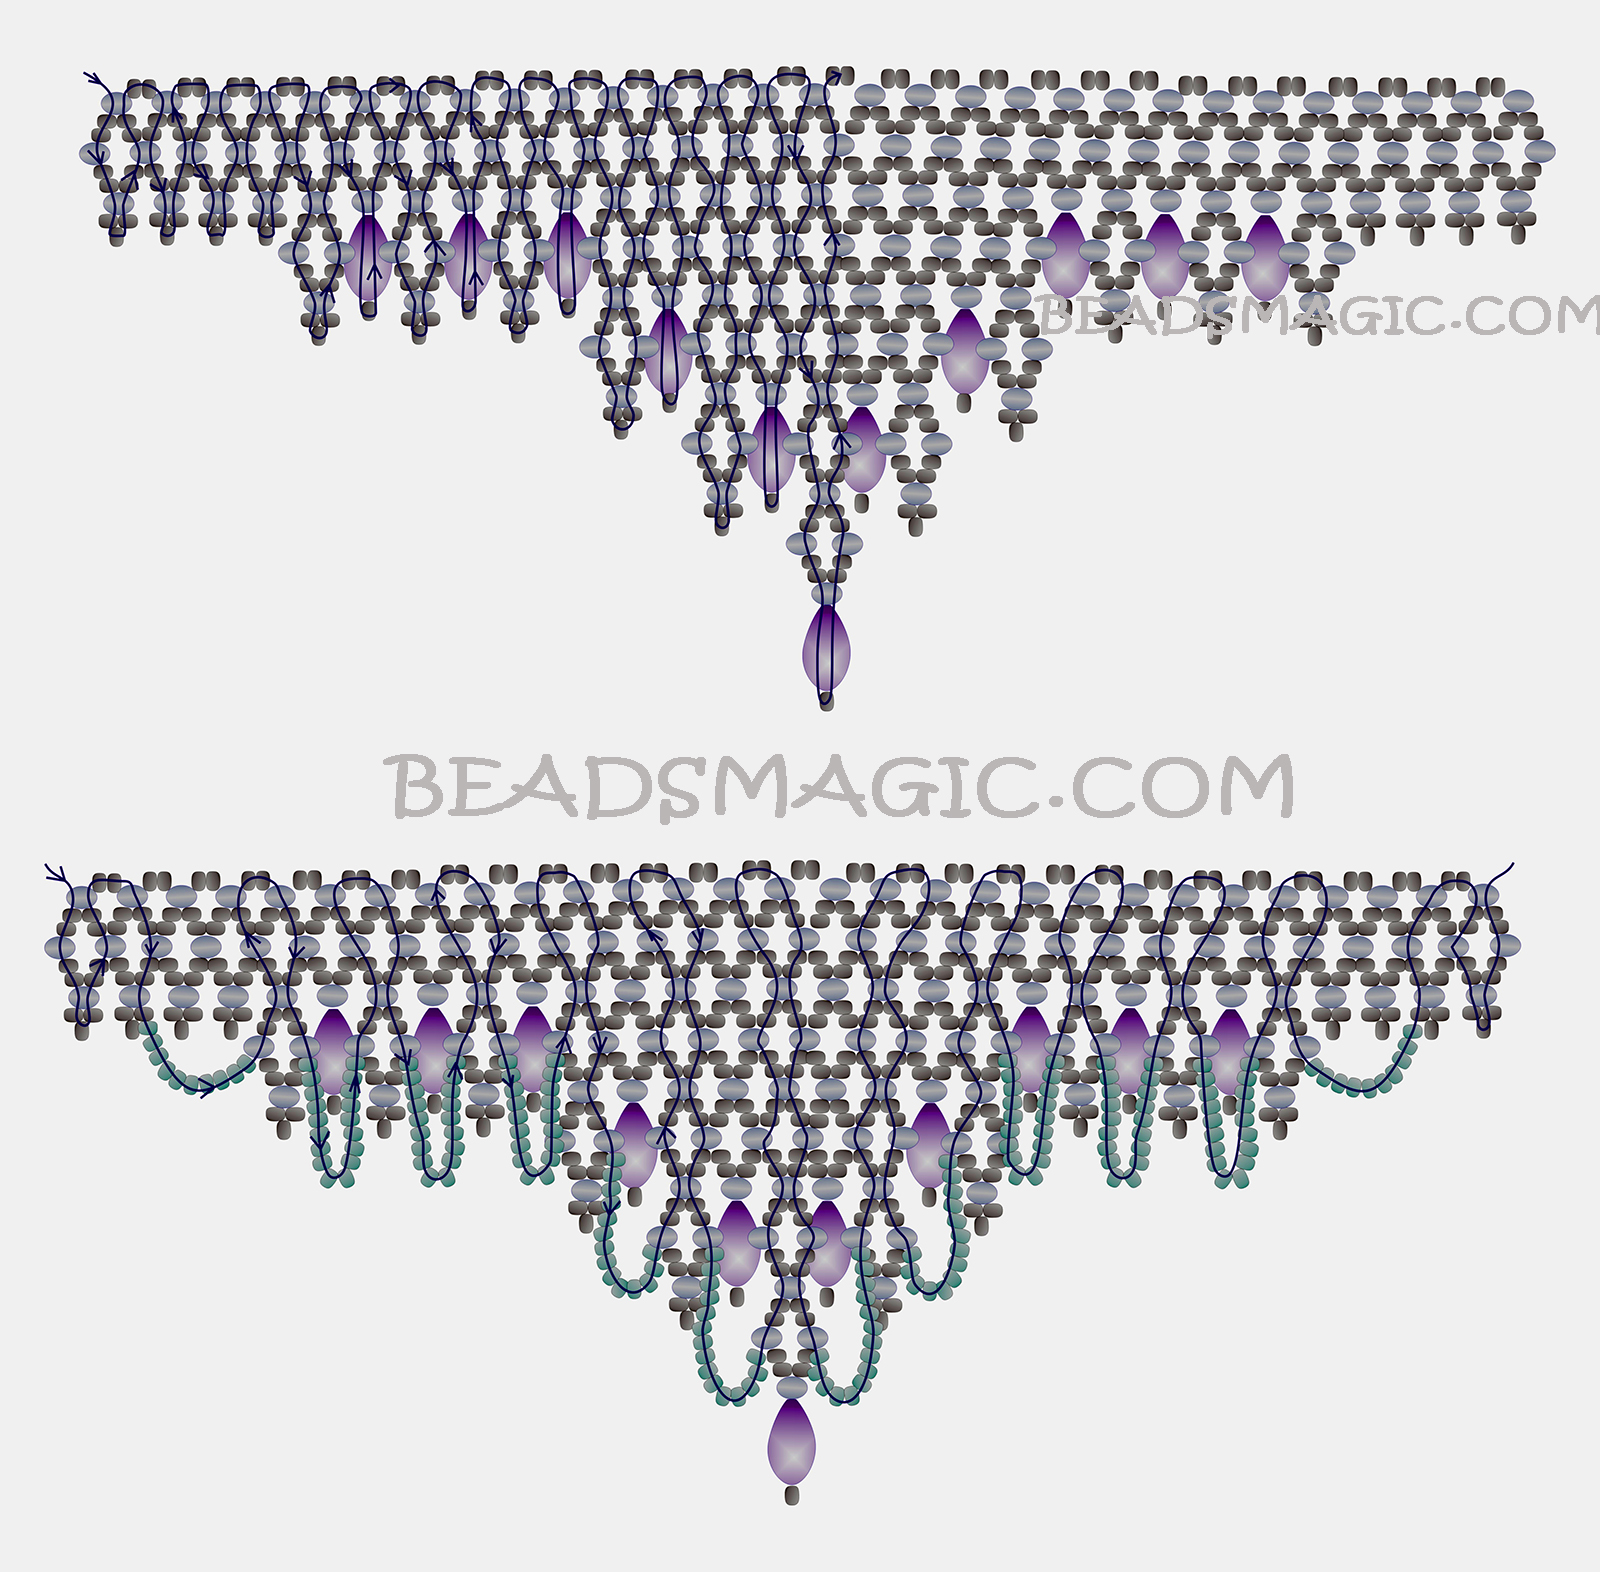 free-beading-tutorial-necklace-pattern-2